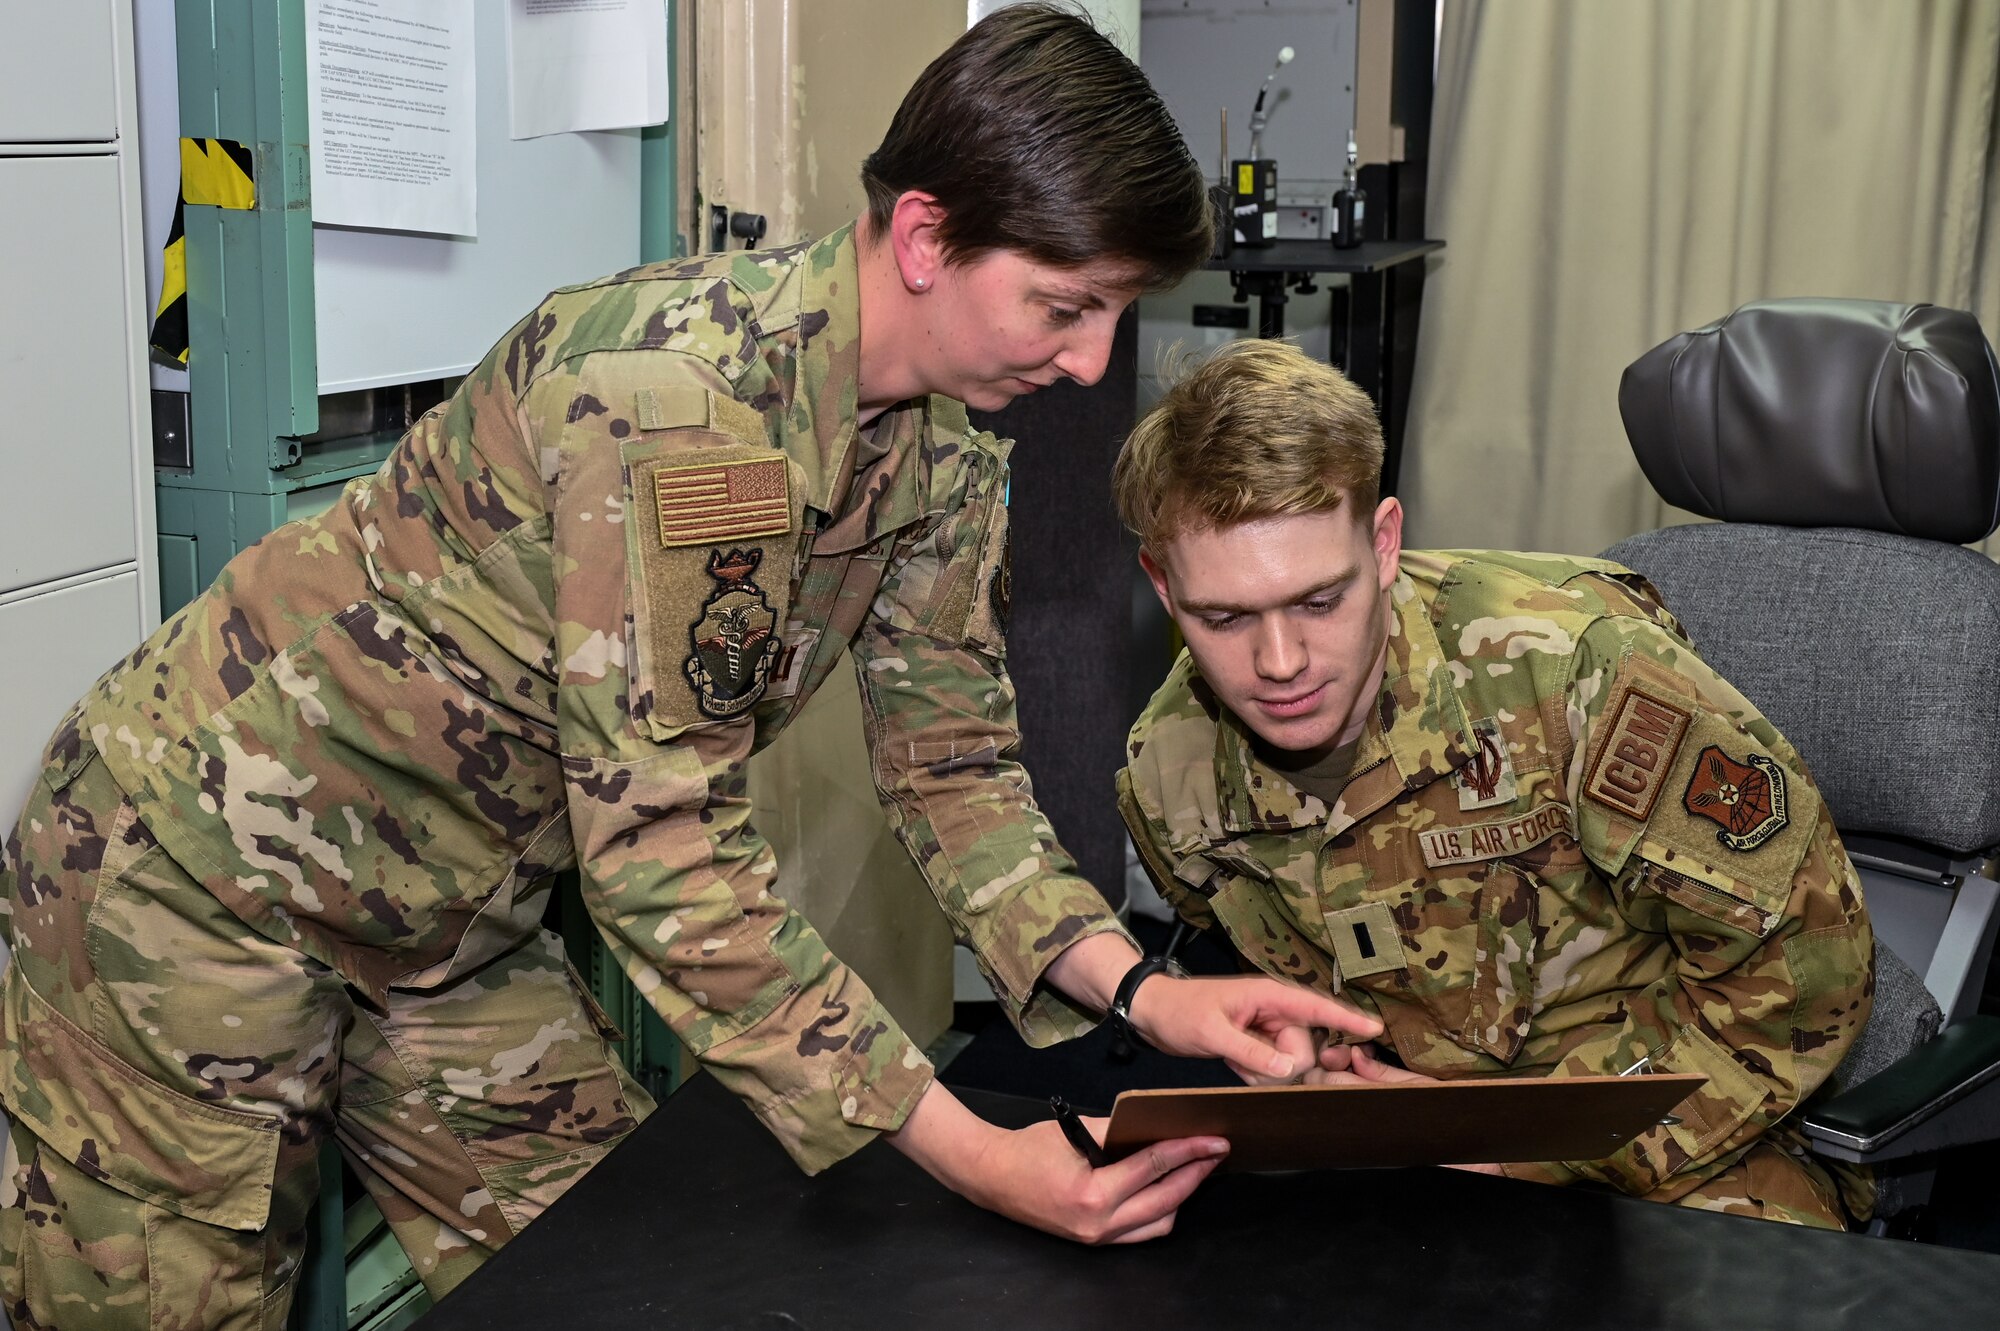 Capt. Isabella Muffoletto, U.S. Air Force School of Aerospace Medicine bioenvironmental engineer, explains the different tests to 1st Lt. Nikolai Voinoff, 321st Missile Squadron combat crew commander, at L-01 missile alert facility, or MAF, near Stoneham, Colorado, July 13, 2023. USAFSAM teams visited all of F.E. Warren Air Force Base’s MAFs as part of the ongoing missile community cancer study at all three intercontinental ballistic missile wings in Air Force Global Strike Command. While there, the teams assessed indoor air quality at each facility to include temperature, humidity, carbon dioxide and carbon monoxide levels. They also collected water and soil samples and tested for the presence of radon, polychlorinated biphenyls, organic phosphates and other potential occupational exposure hazards. USAFSAM is part of the Air Force Research Laboratory’s 711th Human Performance Wing. (U.S. Air Force photo by Joseph Coslett Jr.)